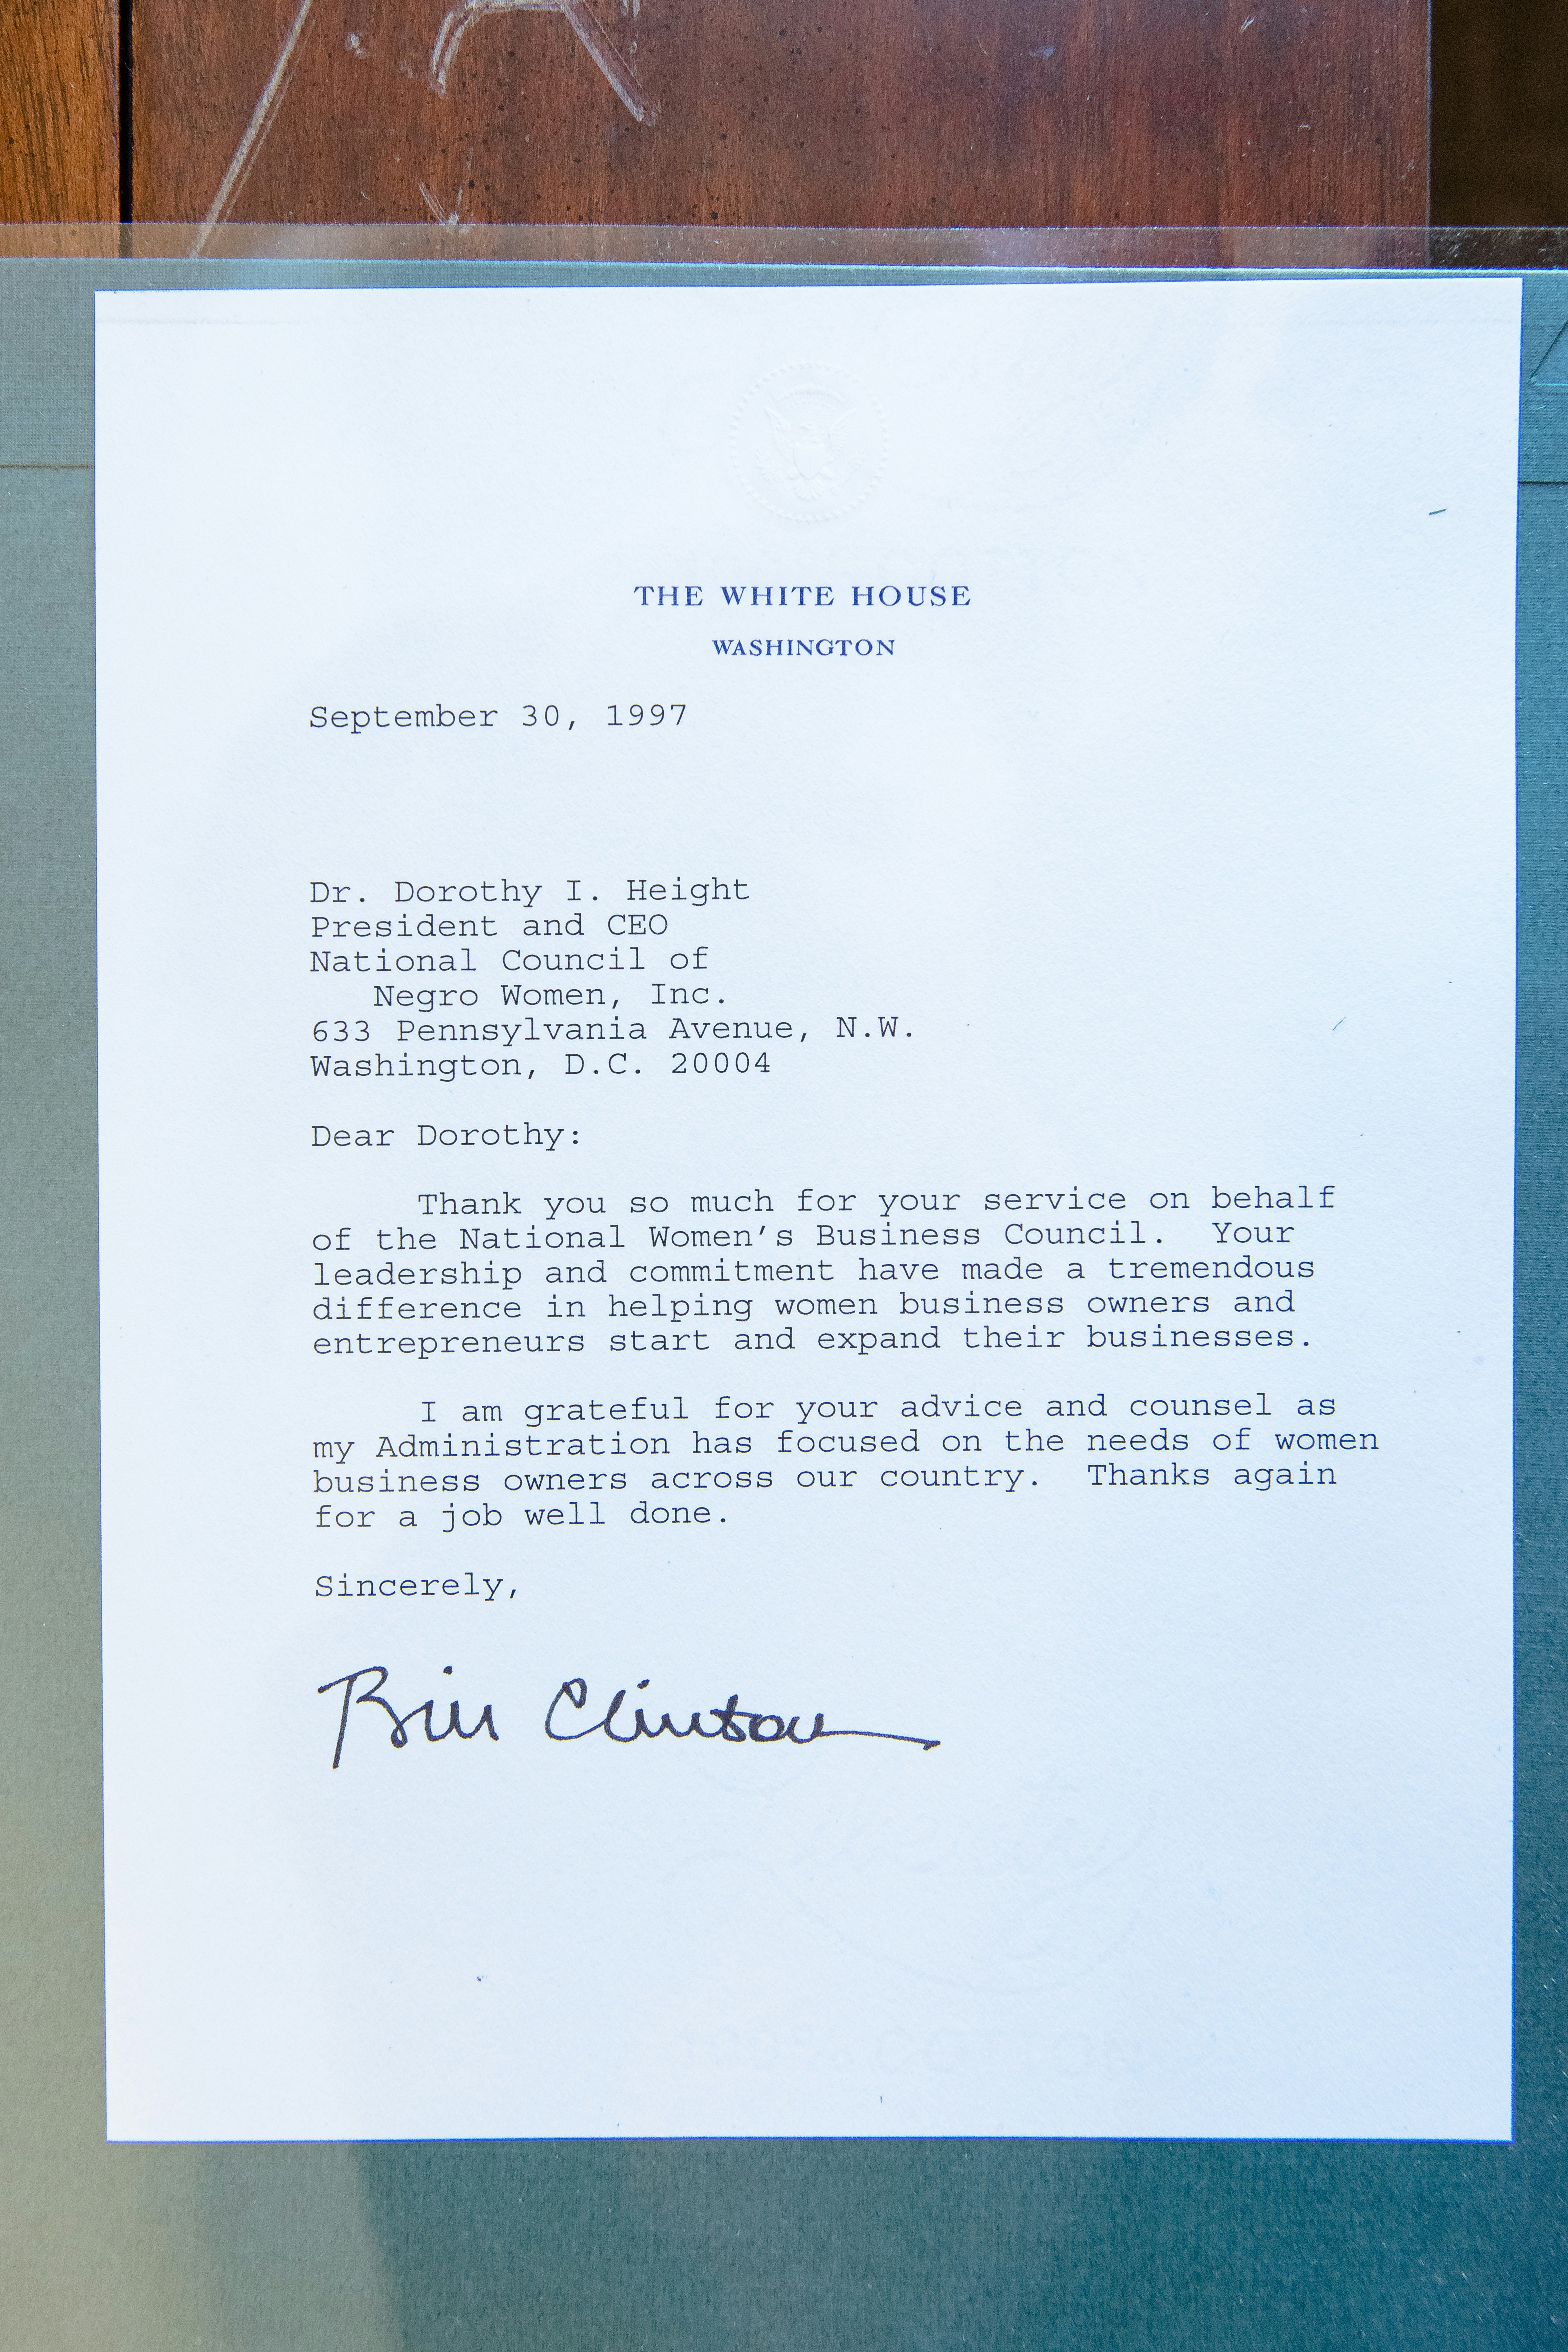 A letter from President BIll Clinton on White House stationery thanks Height for her service on the National Women's Business Council, dated September 30, 1997.